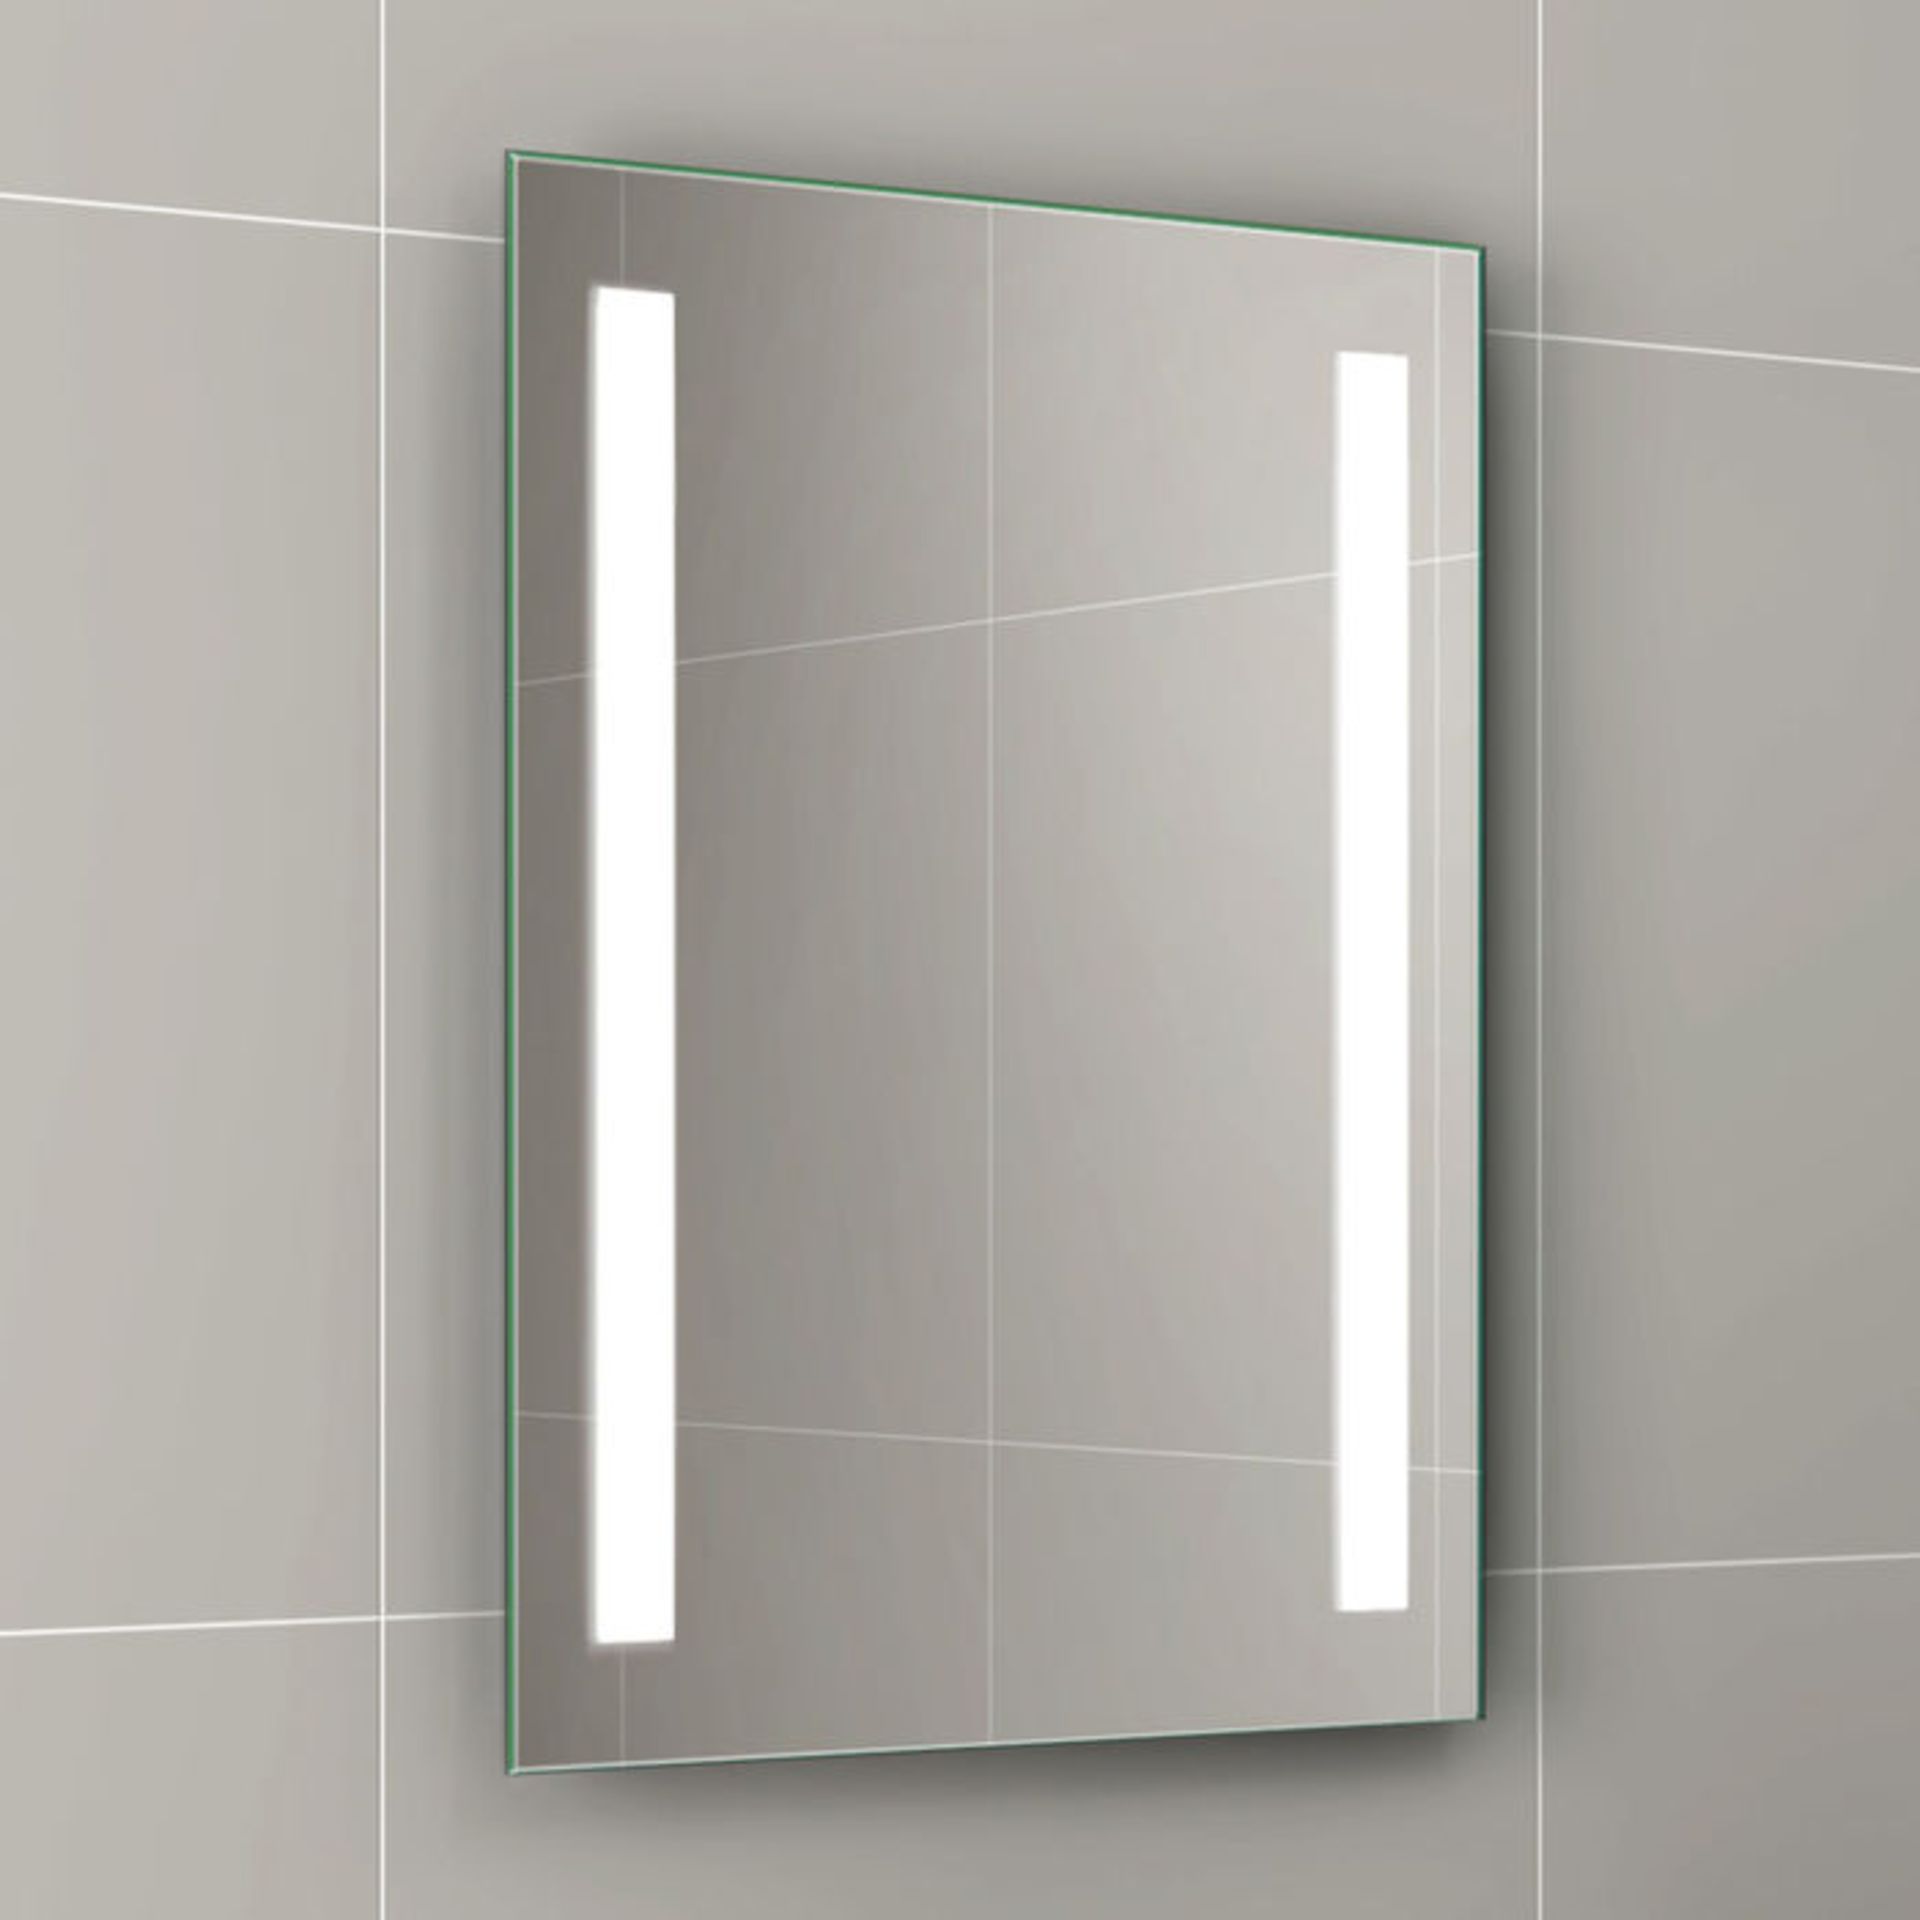 (T65) 500x700mm Omega LED Mirror - Battery Operated. Energy saving controlled On / Off - Image 2 of 2